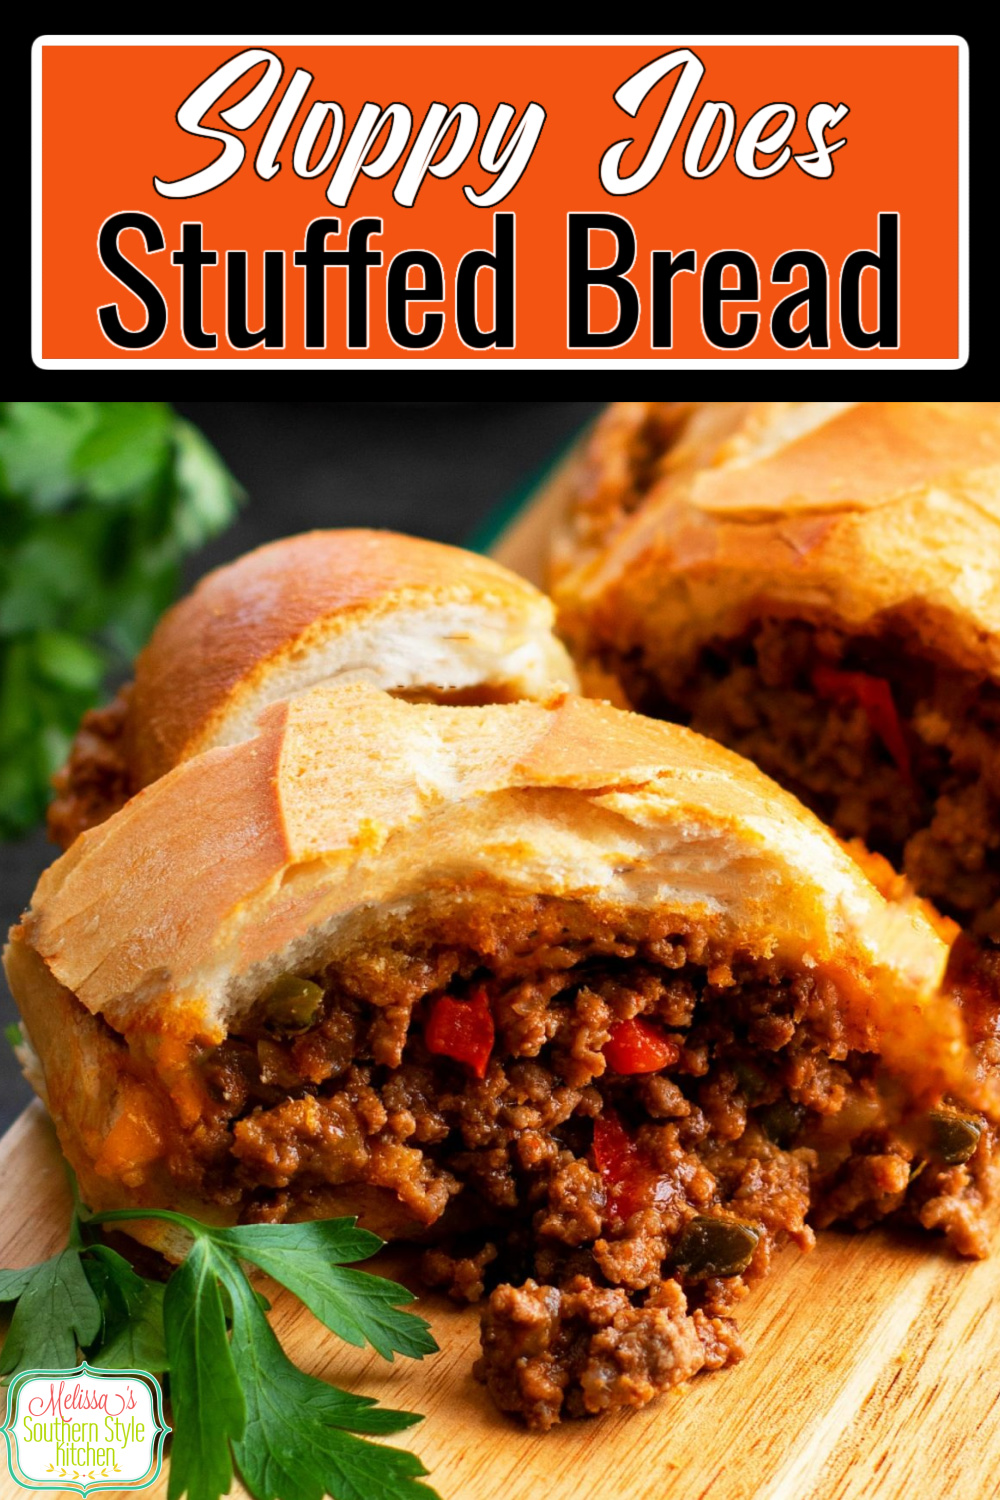 Skip the buns and make this family-style Sloppy Joes Stuffed Bread, instead. Add a side of chips and it's dinner-time in no time flat. #sloppyjoes #sloppyjoesstuffedbread #stuffedbreadrecipes #easygroundbeefrecipes #bestsloppyjoes #dinner #dinnerideas #southernfood #southernrecipes via @melissasssk